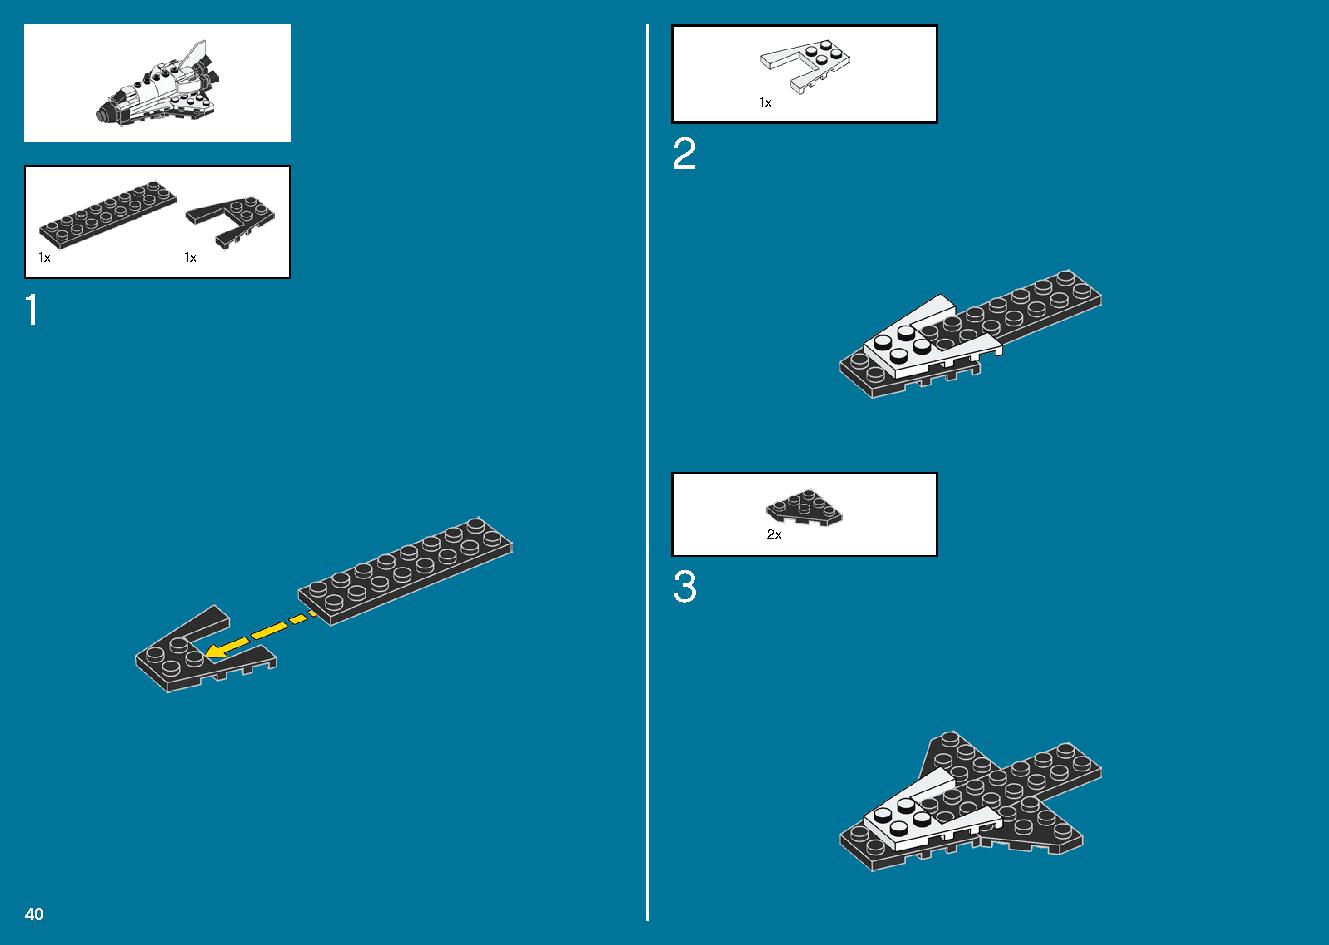 International Space Station 21321 LEGO information LEGO instructions 40 page